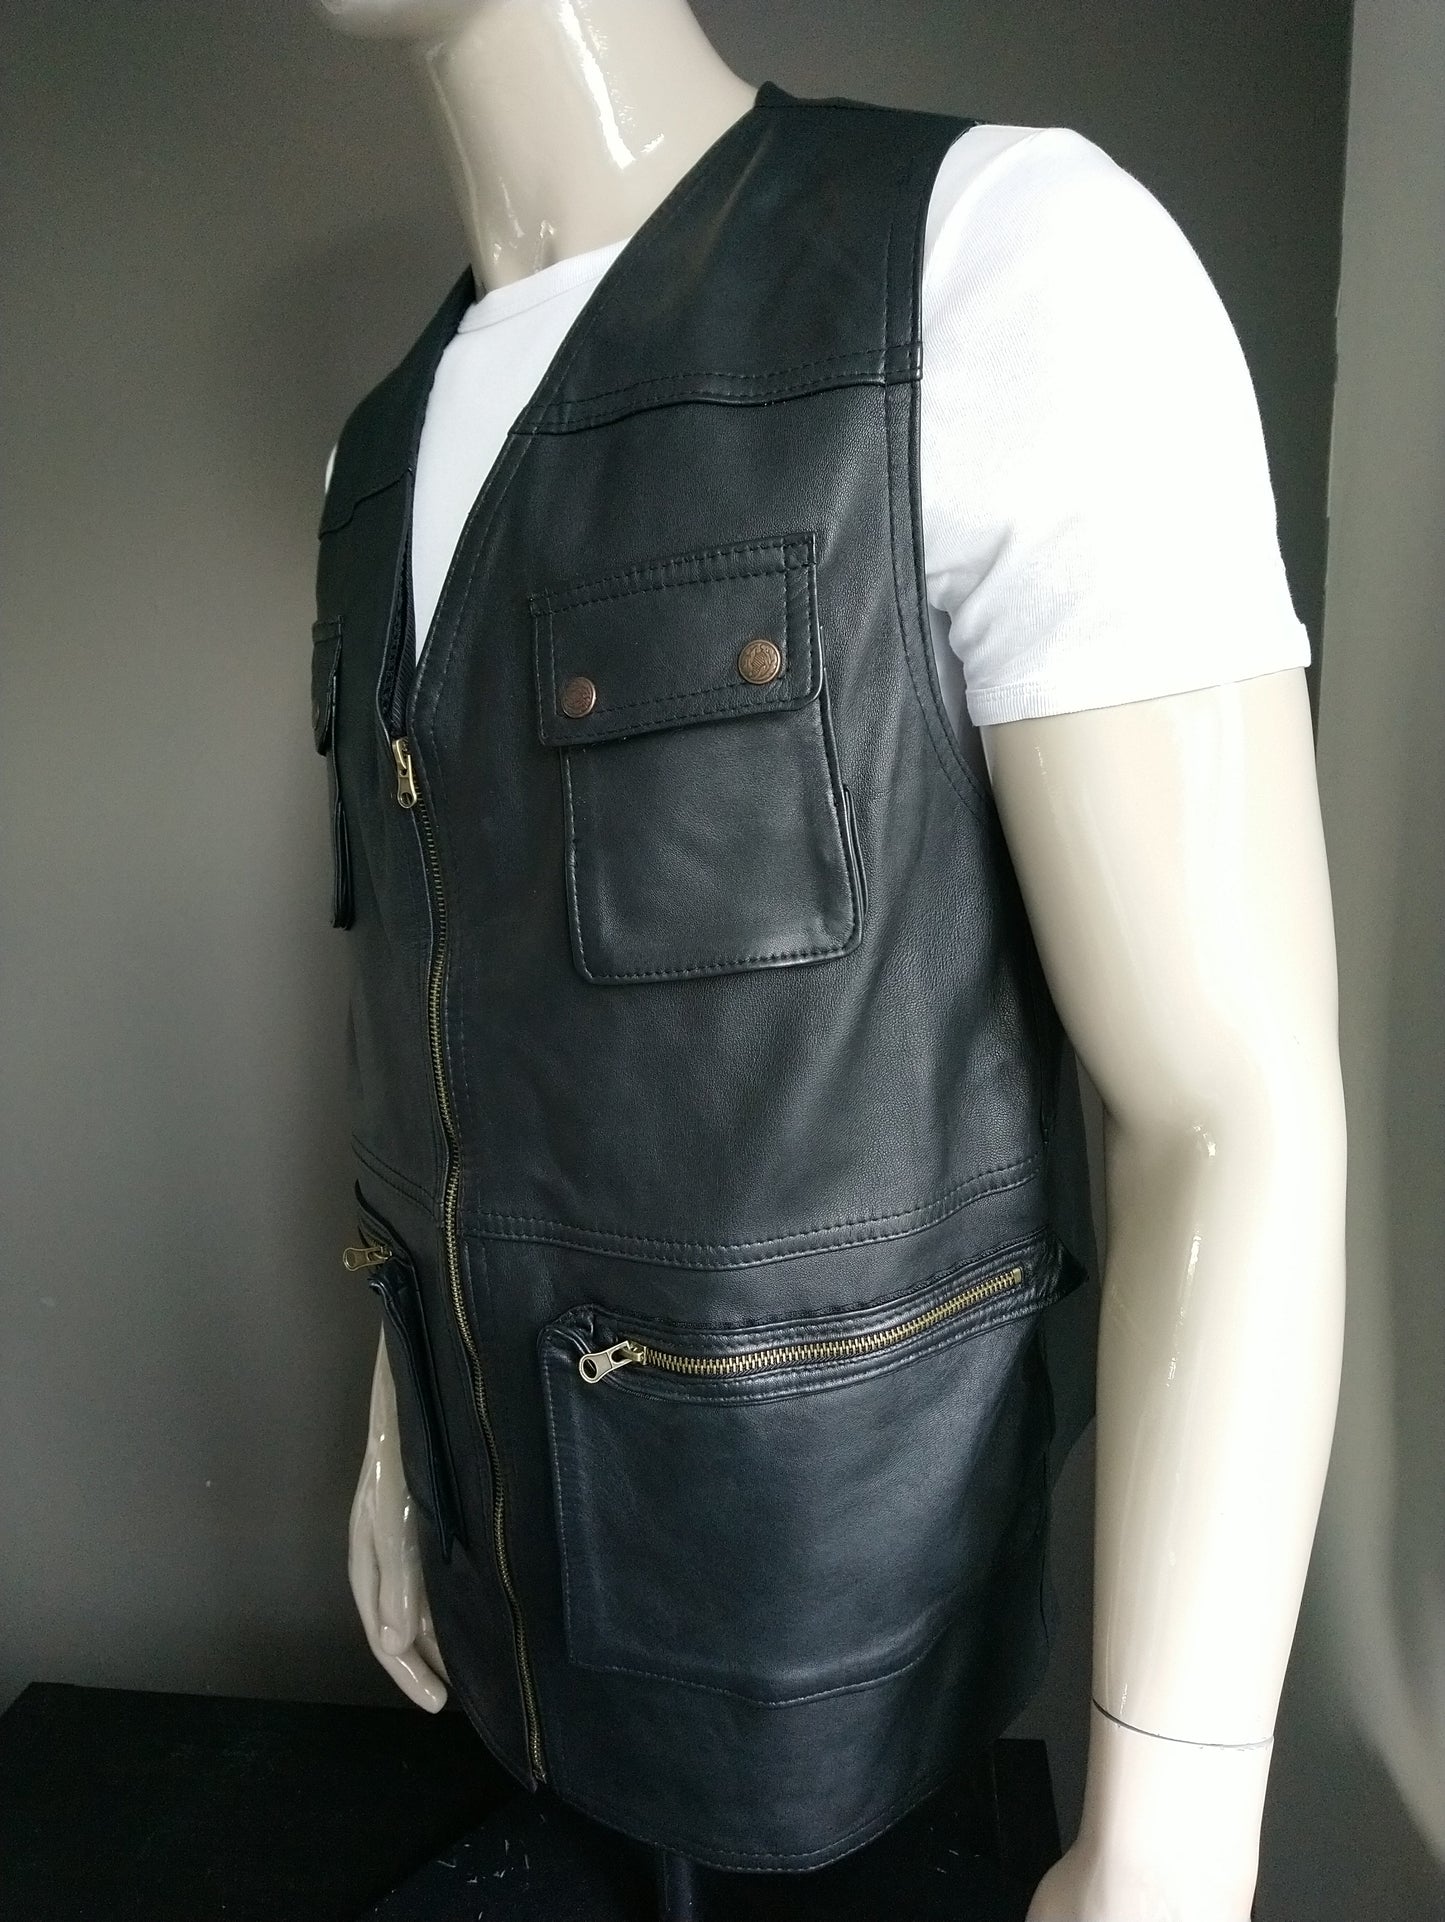 Leather body warmer with bags and zipper. Black colored. Leather back. Size L.